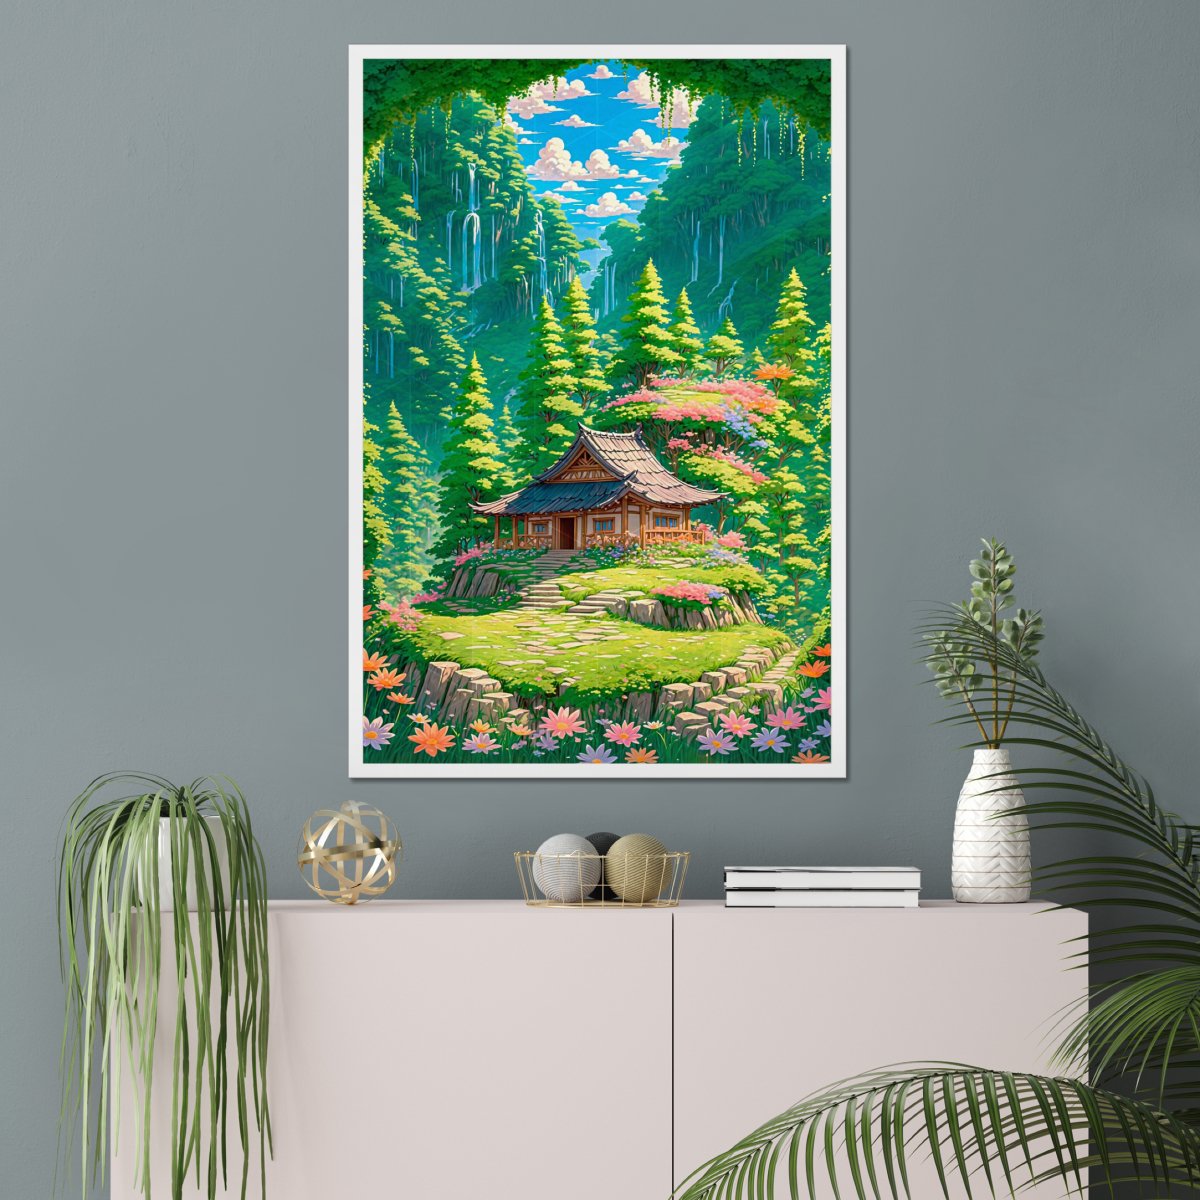 Seventh haven - Art print - Poster - Ever colorful